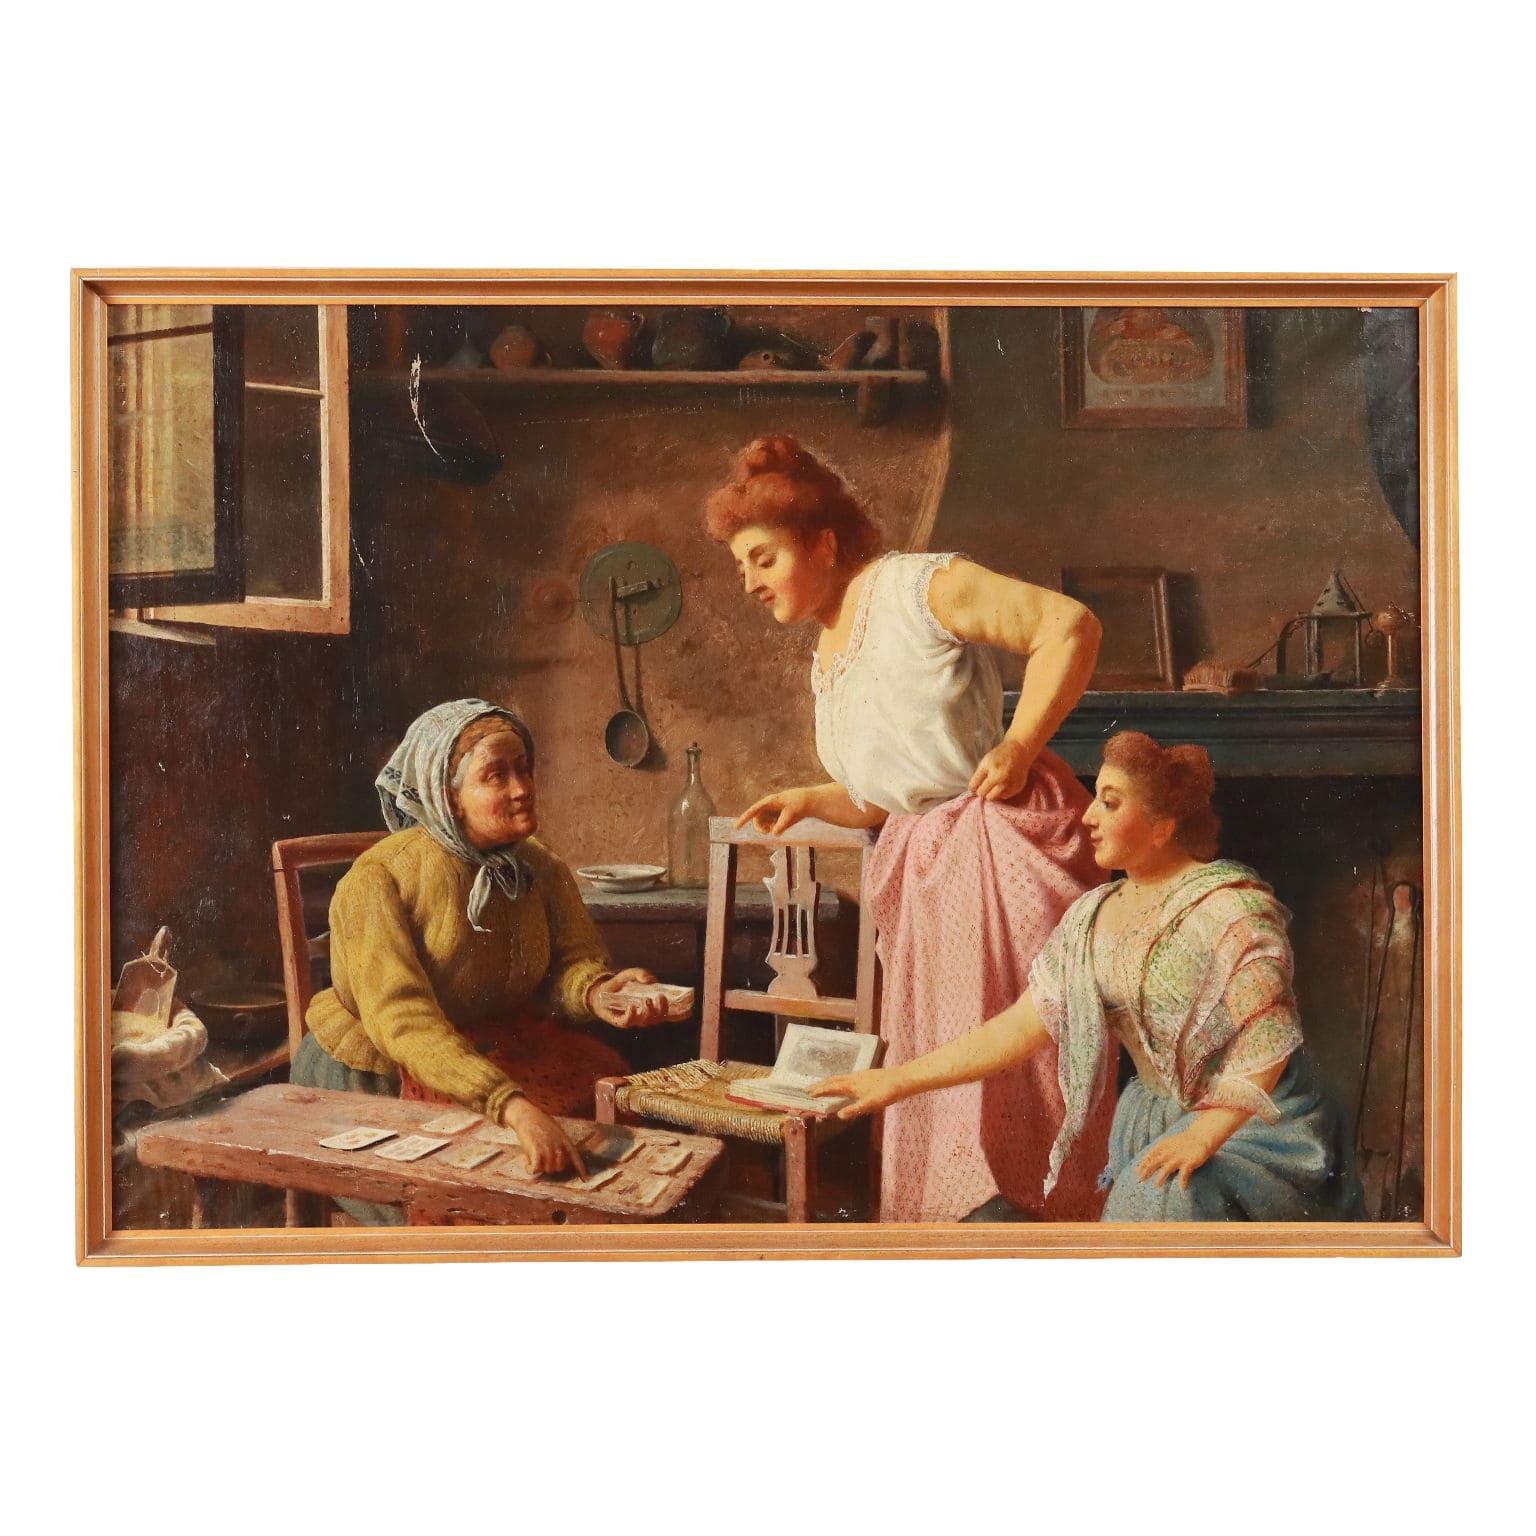 Oil on Canvas. Unsigned, but on the back is a dedication "To Mrs. Clelia Mazzioli, with esteem Gaetano Bellei January 23, 1909."
The large scene, set inside a popular kitchen, features a woman reading cards to two girls, who ask for explanations by